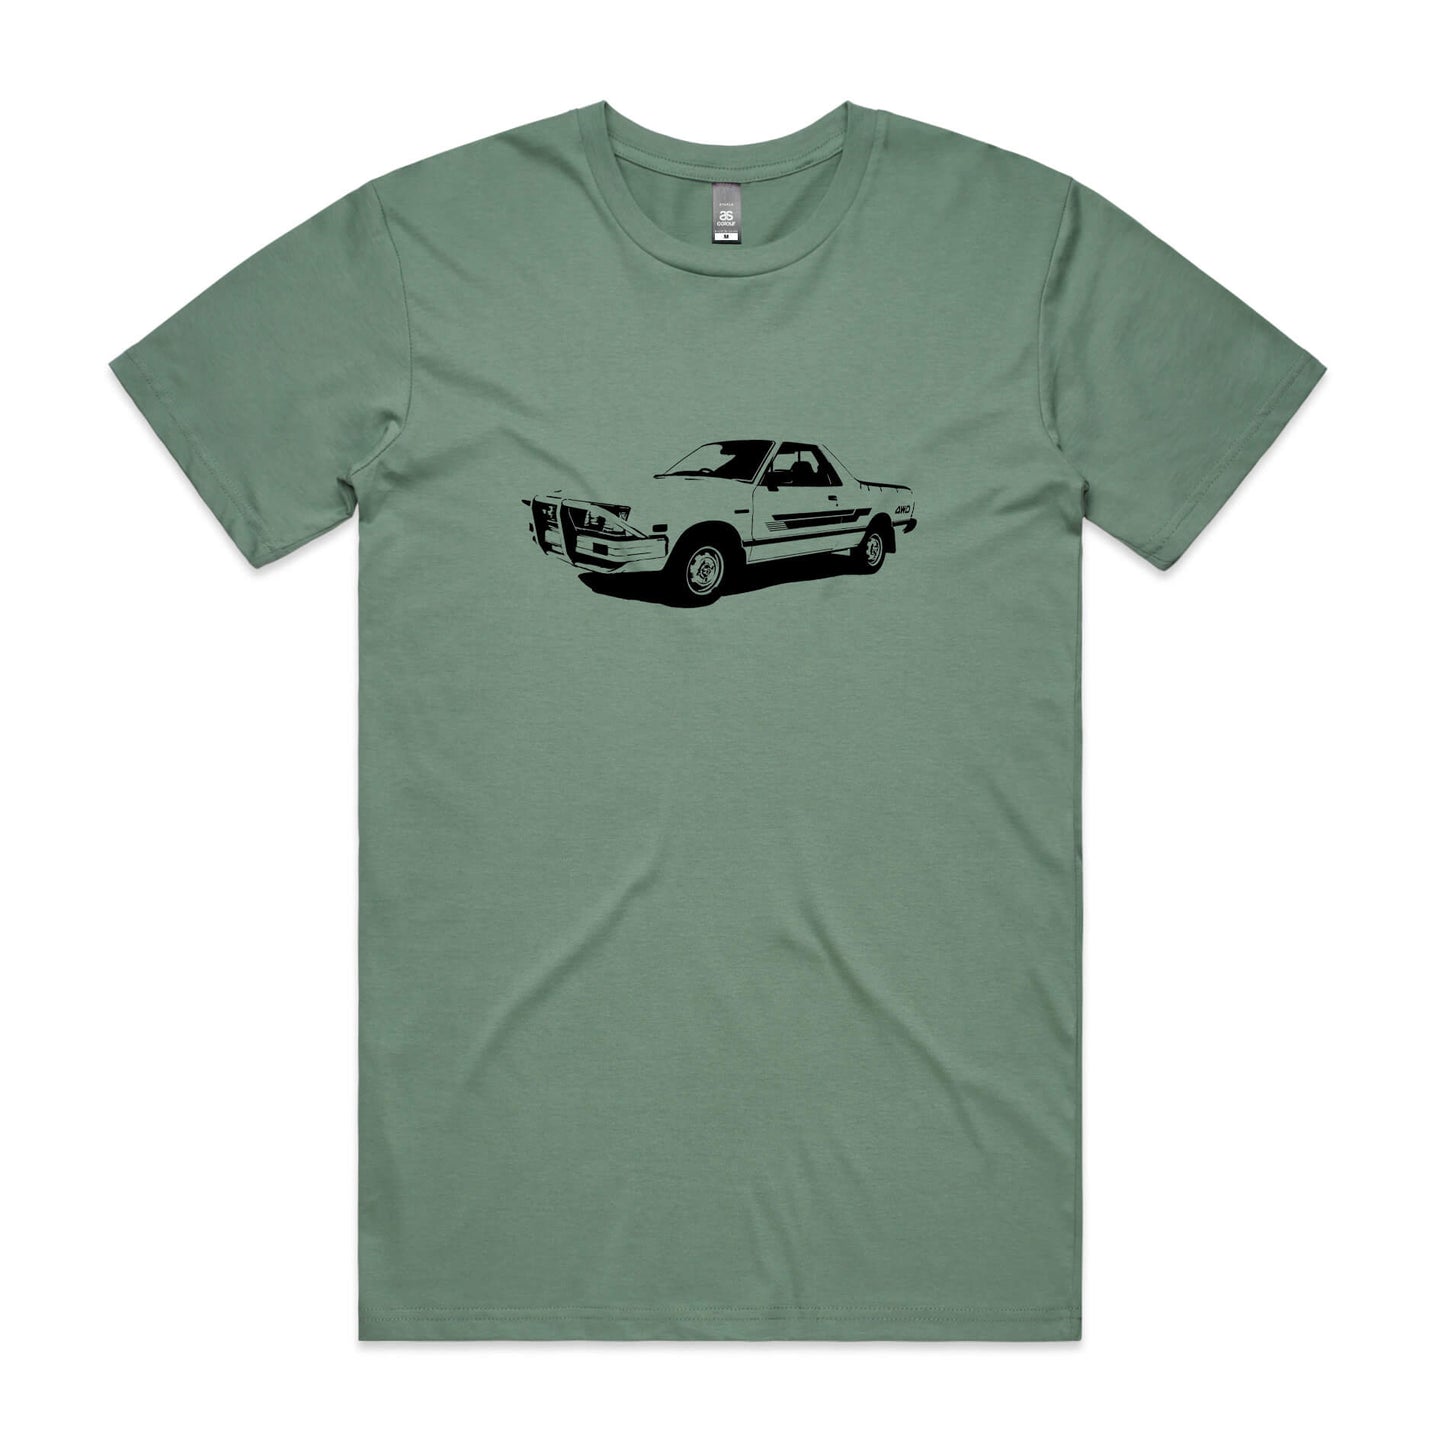 Subaru Brumby t-shirt in sage green with black ute graphic